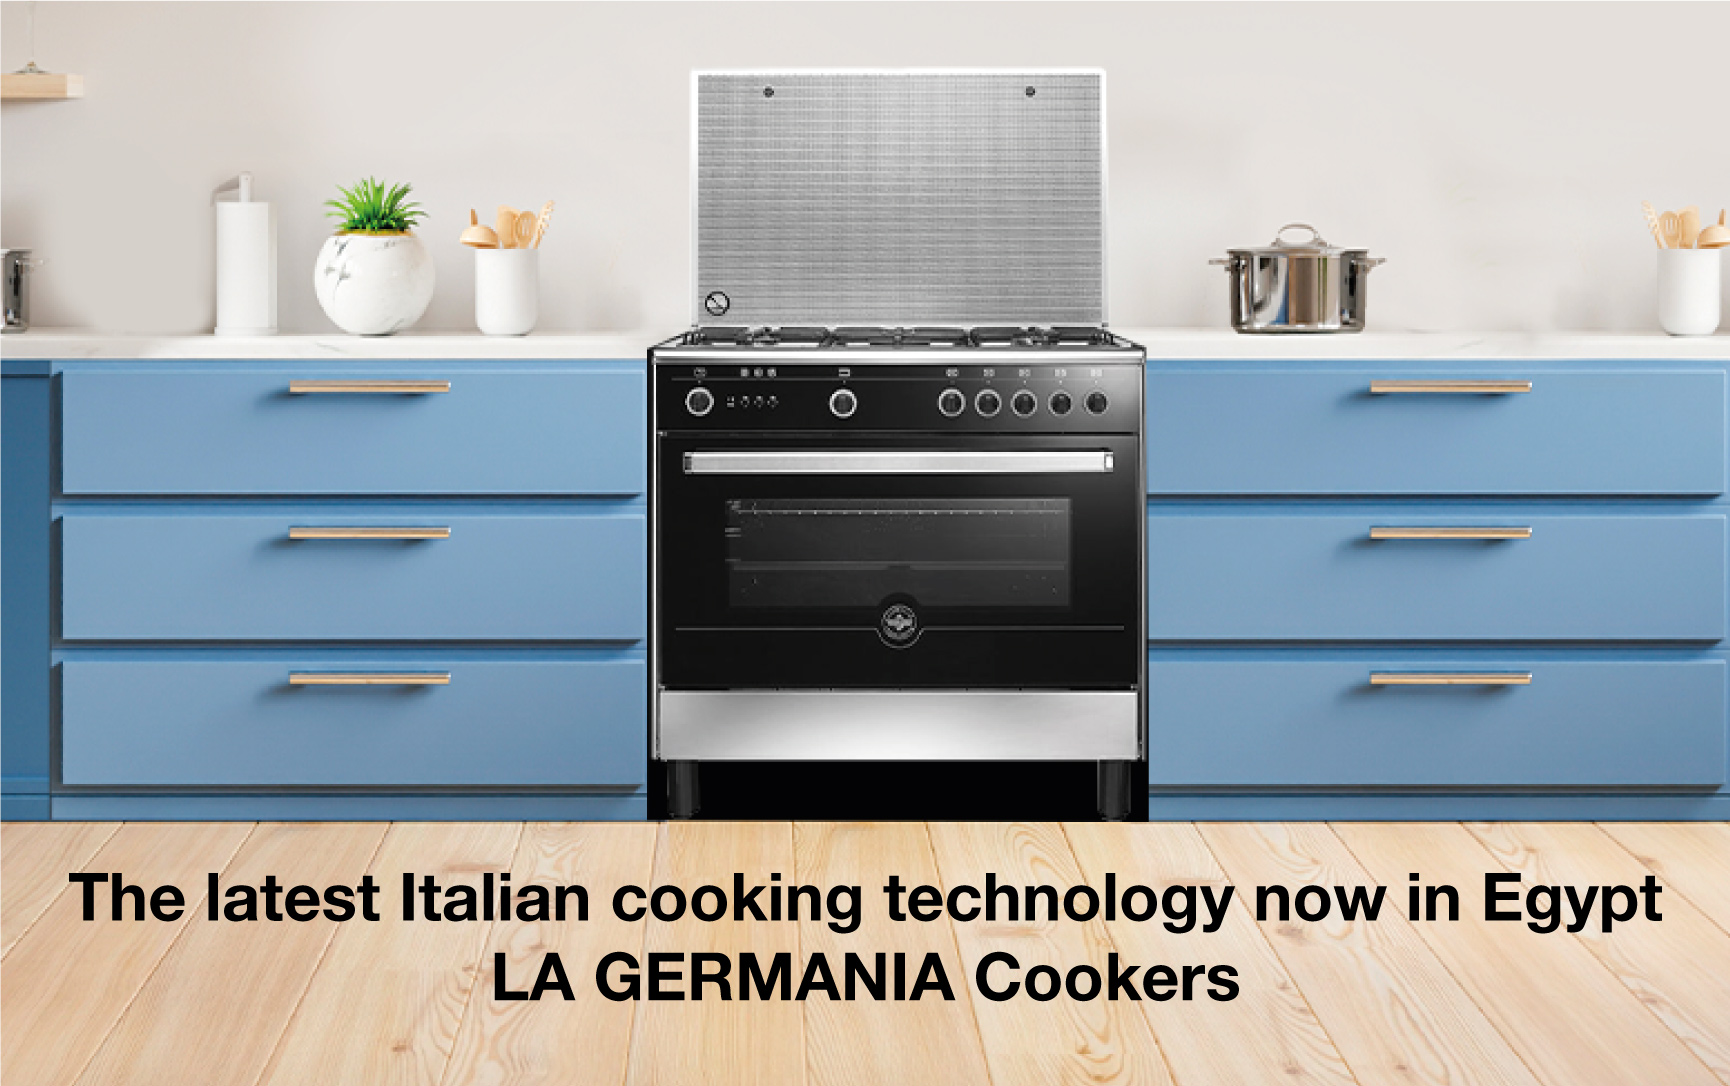 The latest Italian cooking technology now in Egypt - LA GERMANIA Cookers